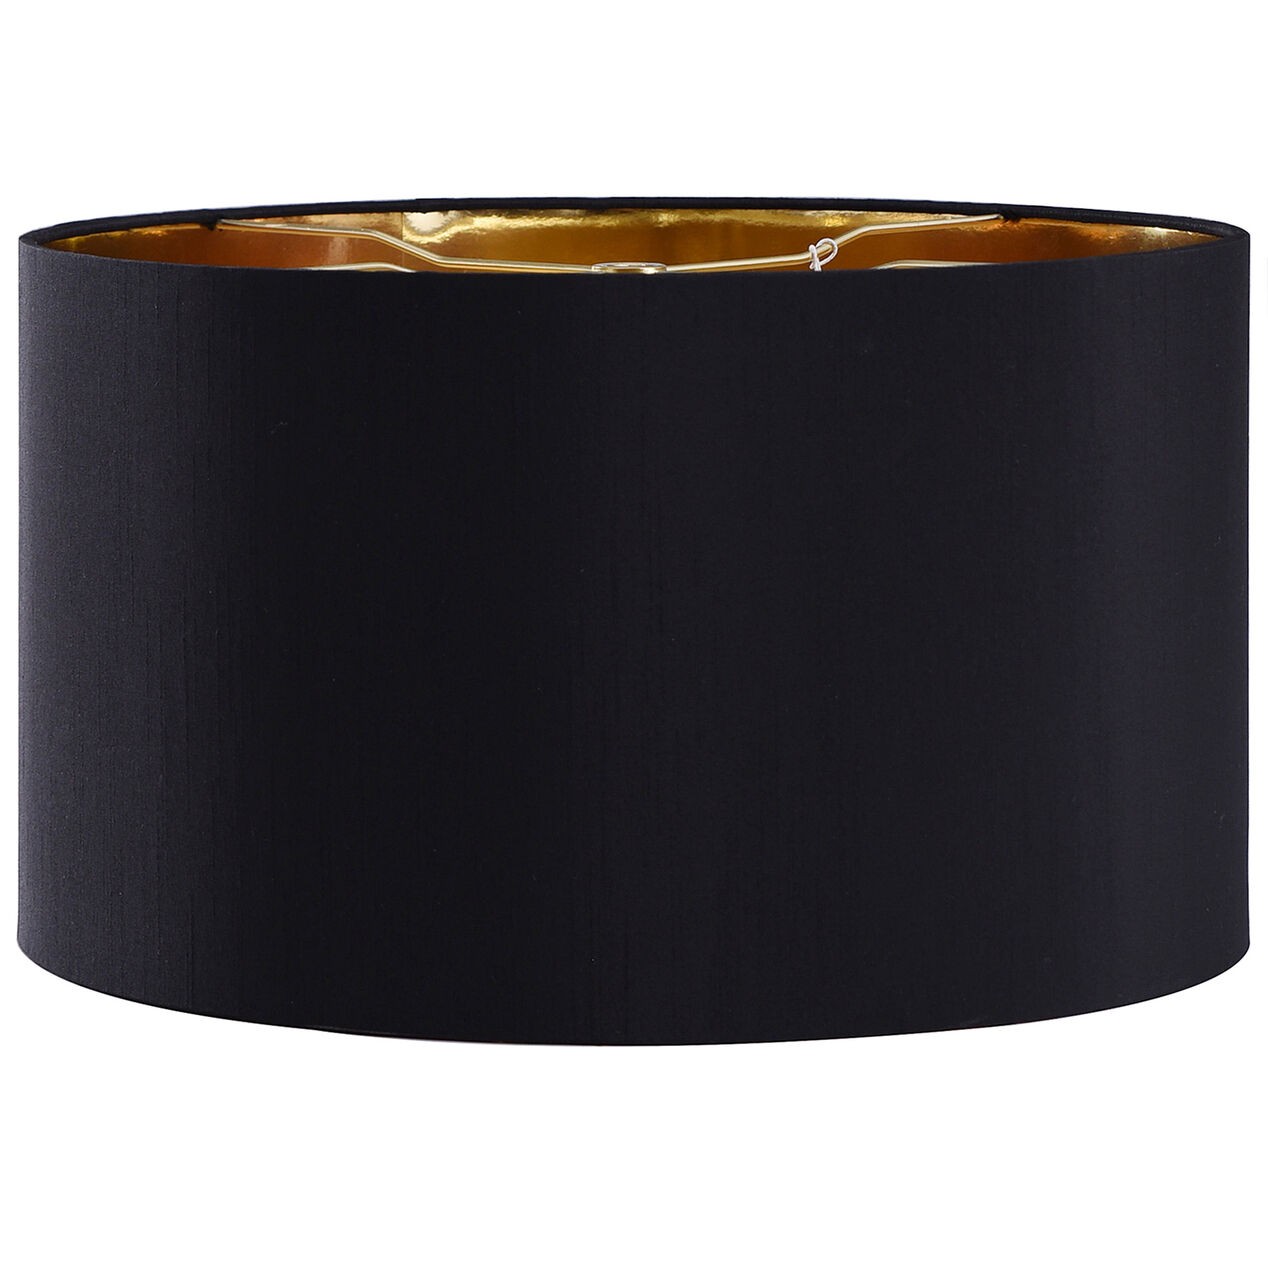 Black drum lampshade with gold liner 16 x 16 x